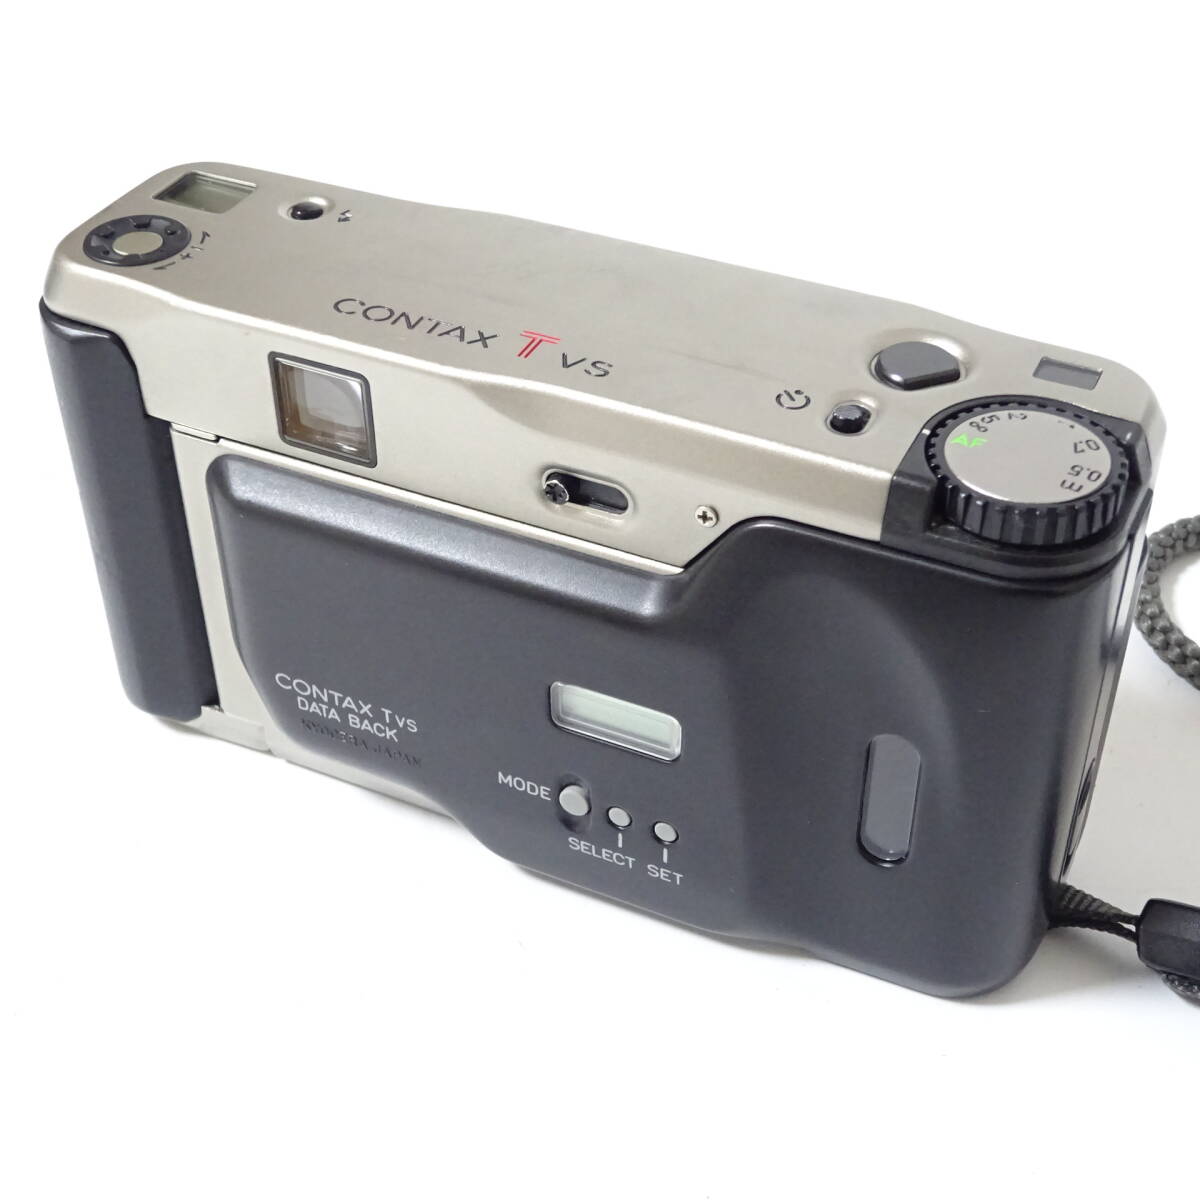 CONTAX Contax T VS compact film camera operation not yet verification 60 size shipping K-2620182-209-mrrz